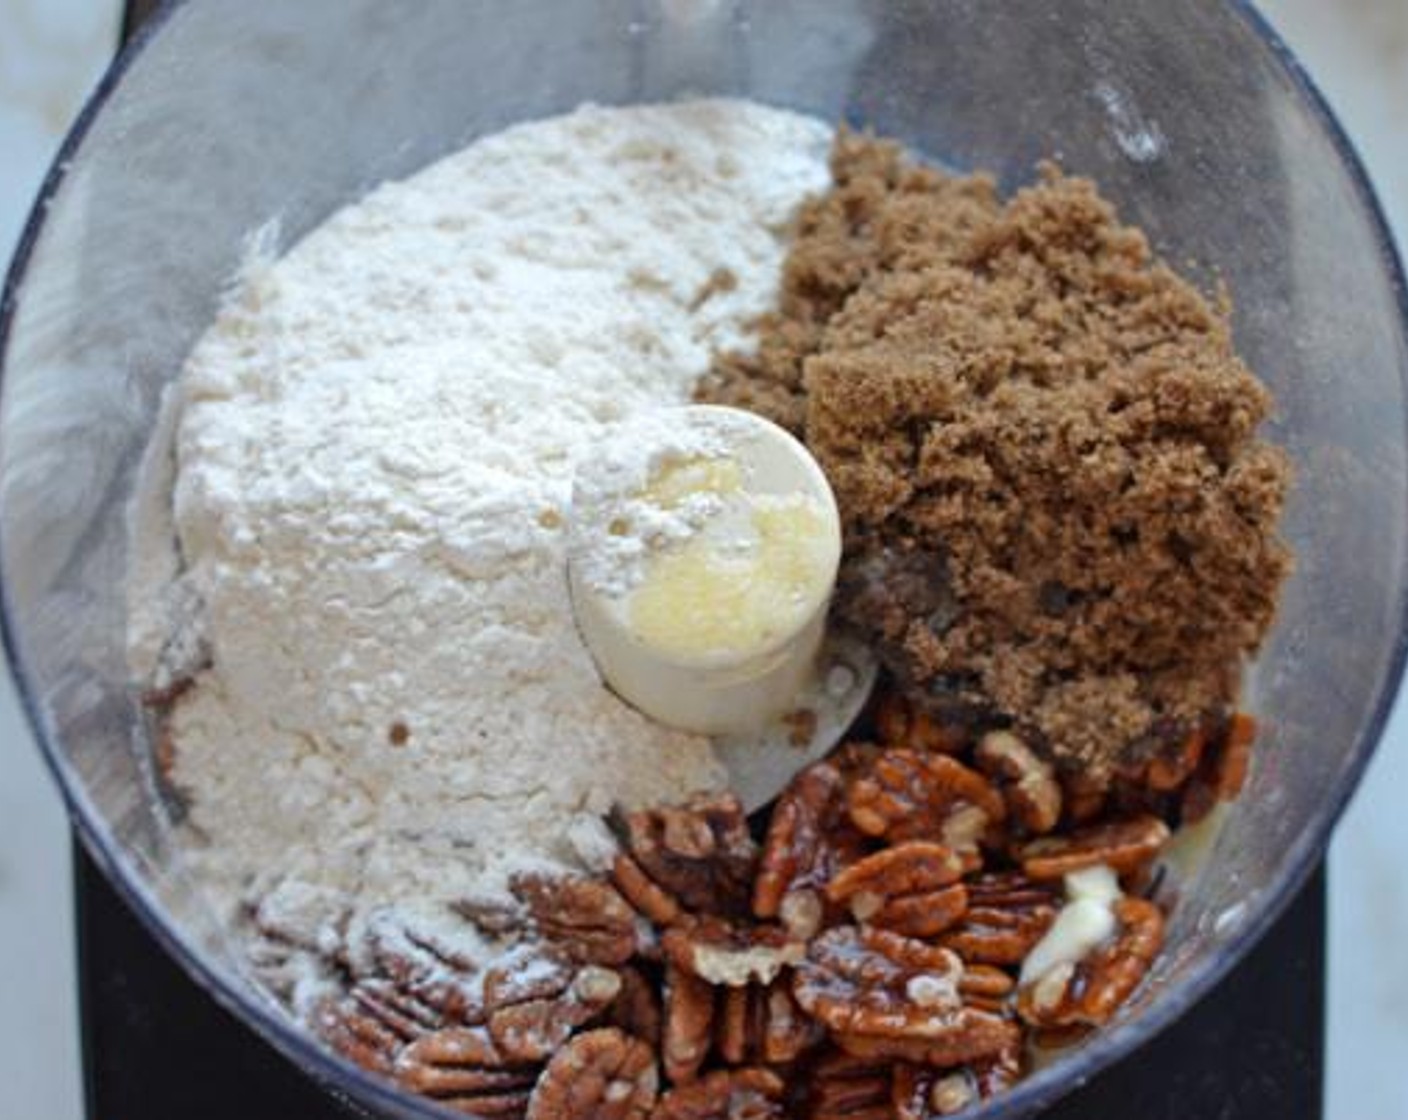 step 2 Combine the Pecans (1 cup), All-Purpose Flour (1 cup), Brown Sugar (1/3 cup), Unsalted Butter (1/4 cup), and Salt (1 pinch) in the bowl of a food processor fitted with the steel blade.